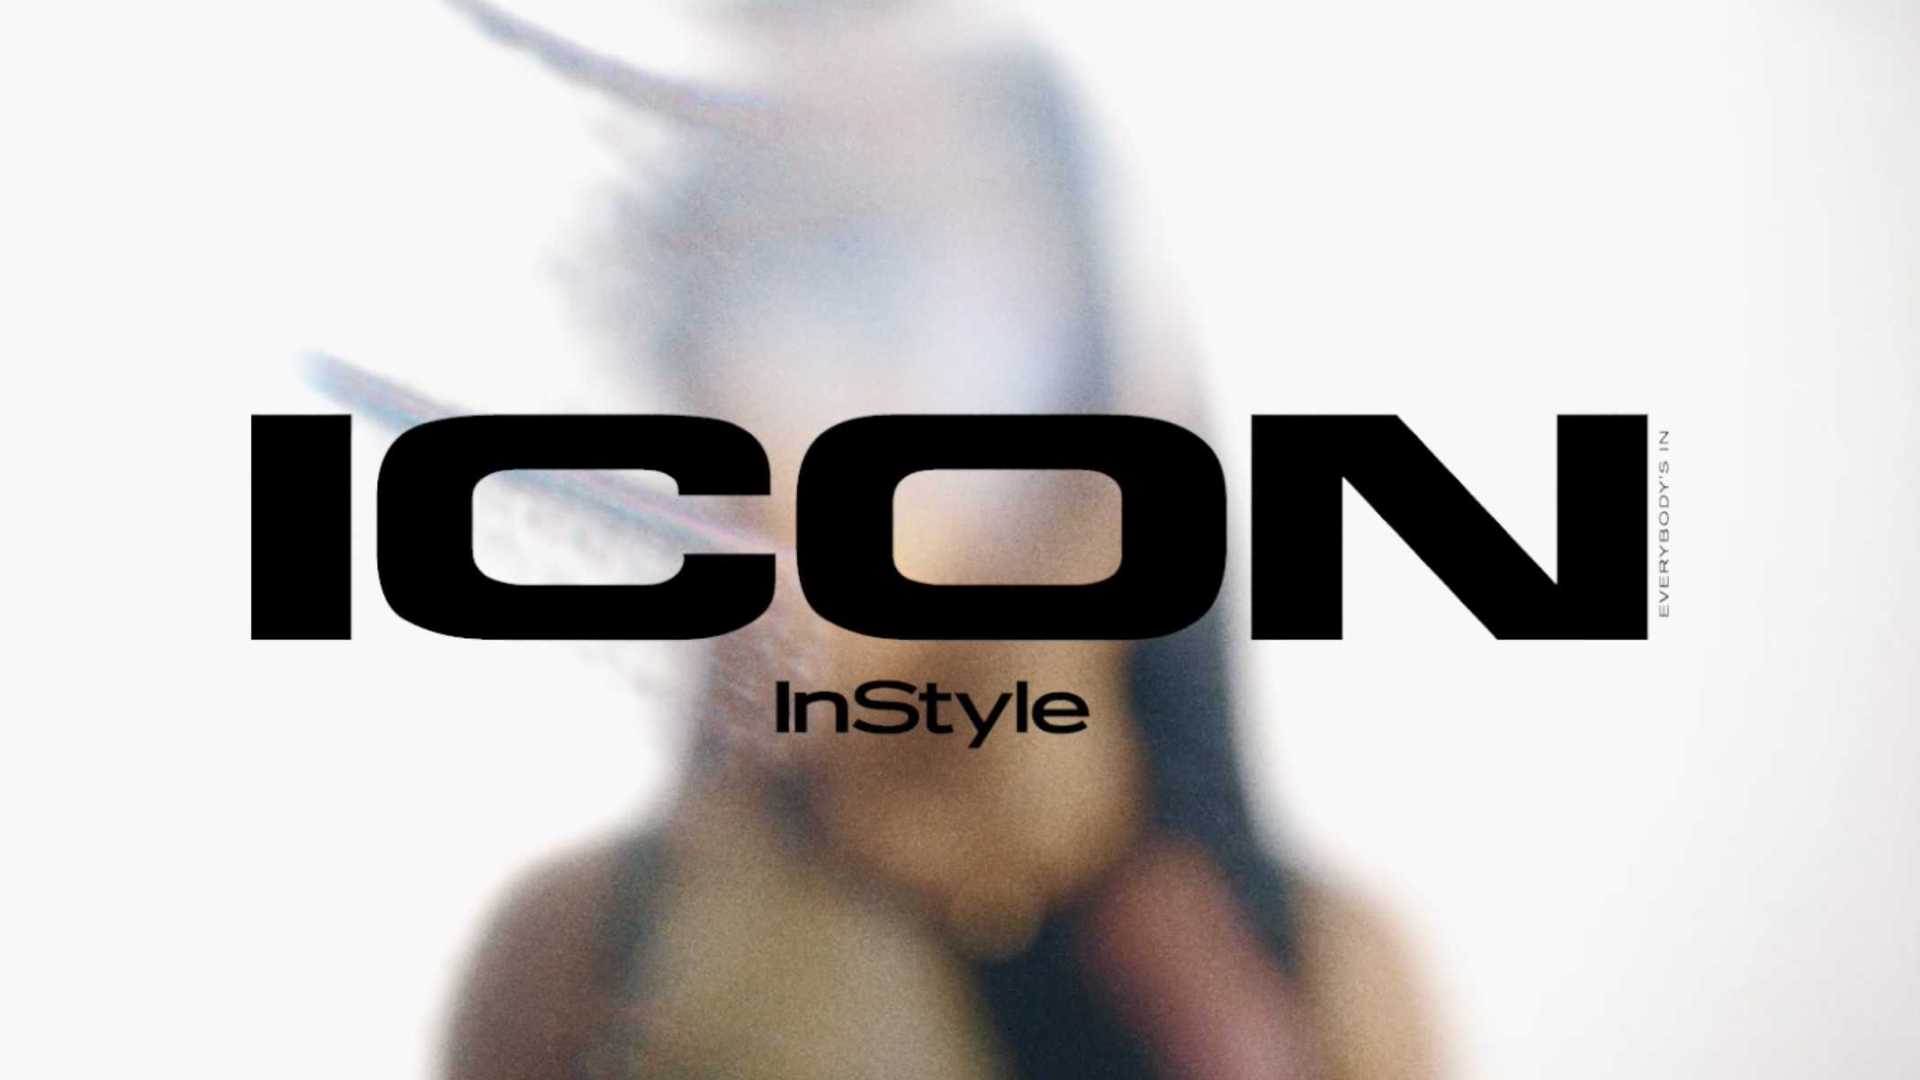 ICON InStyle x Cartier